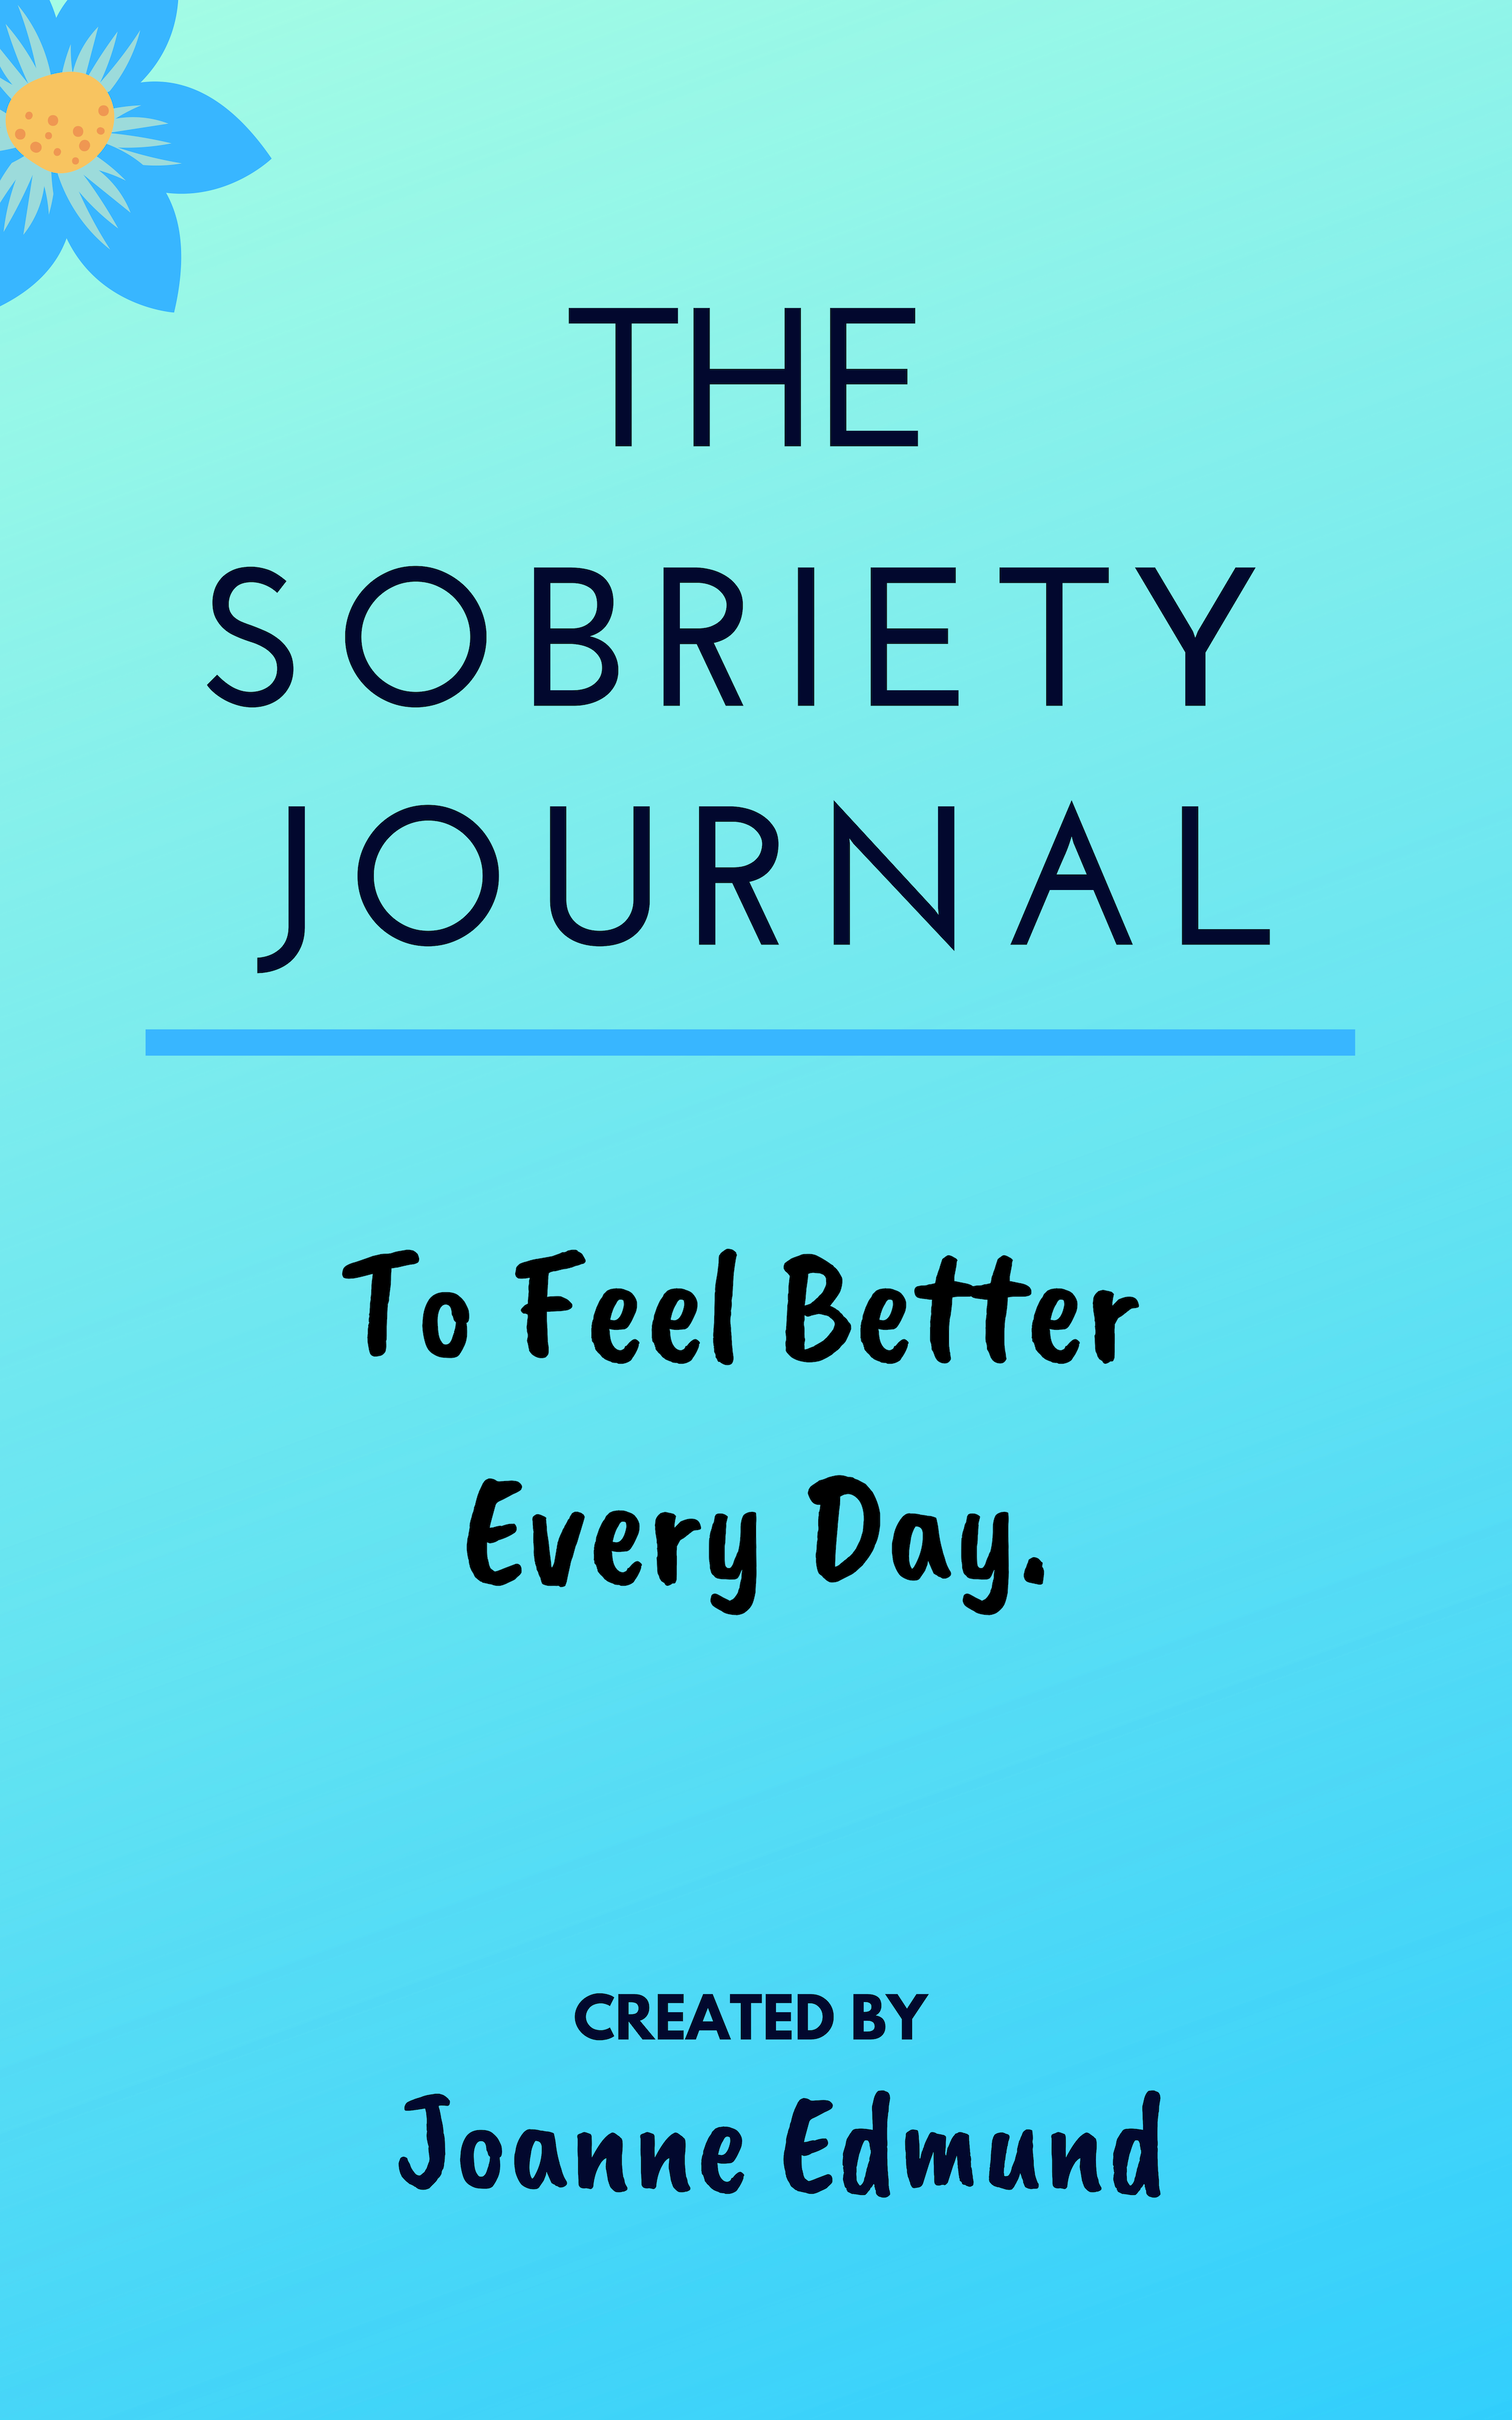 FREE: The Sobriety Journal: To Feel Better Every Day by Joanne Edmund